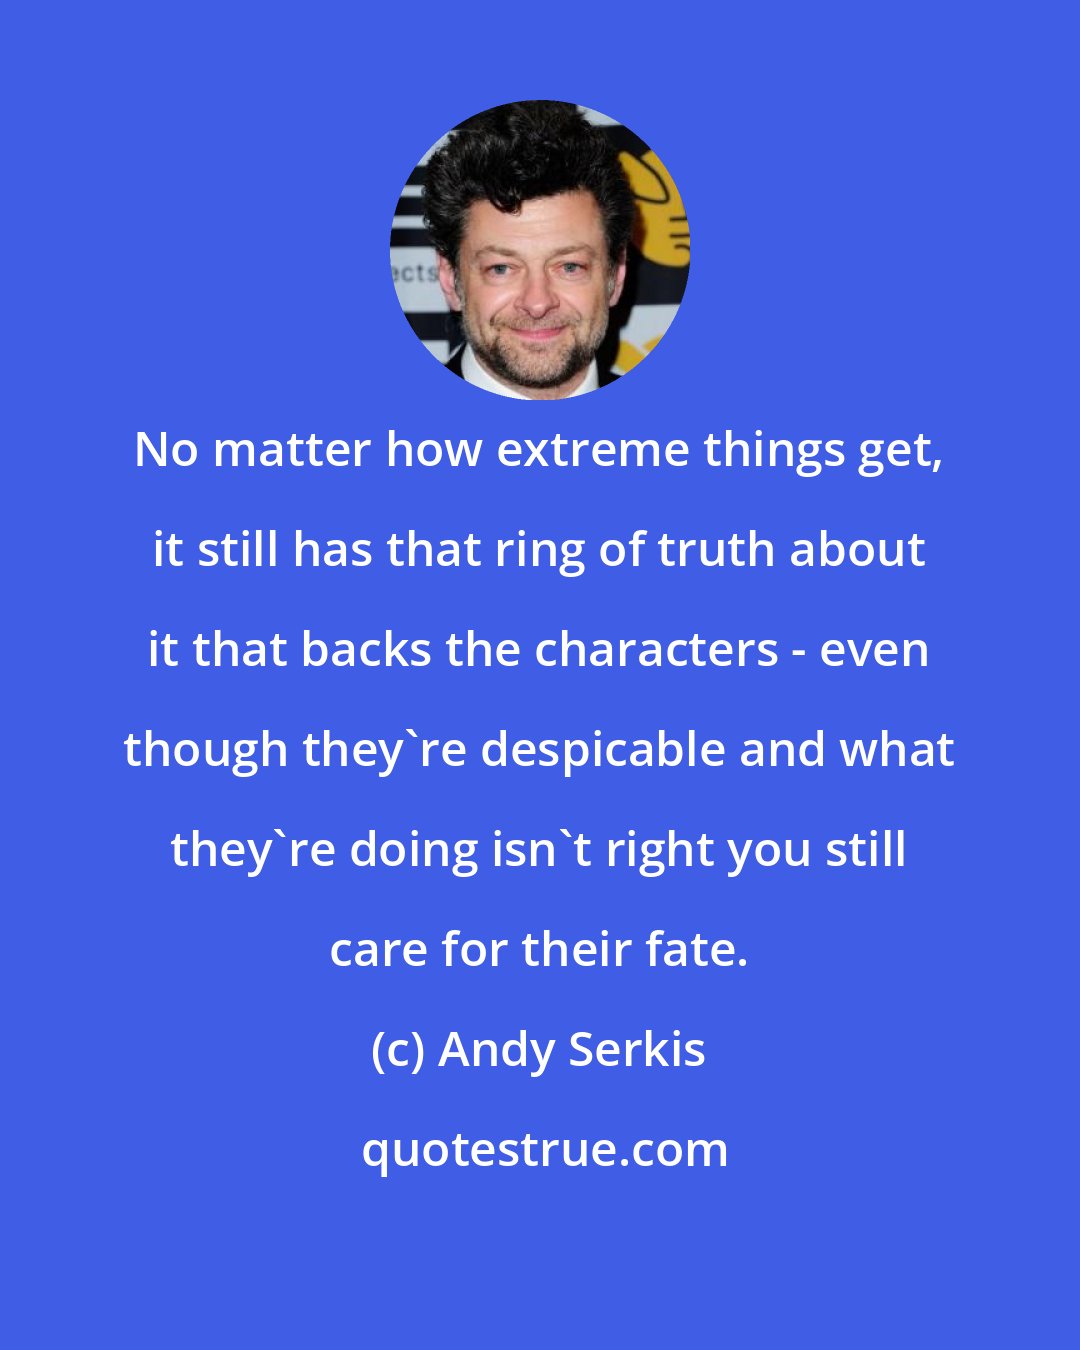 Andy Serkis: No matter how extreme things get, it still has that ring of truth about it that backs the characters - even though they're despicable and what they're doing isn't right you still care for their fate.